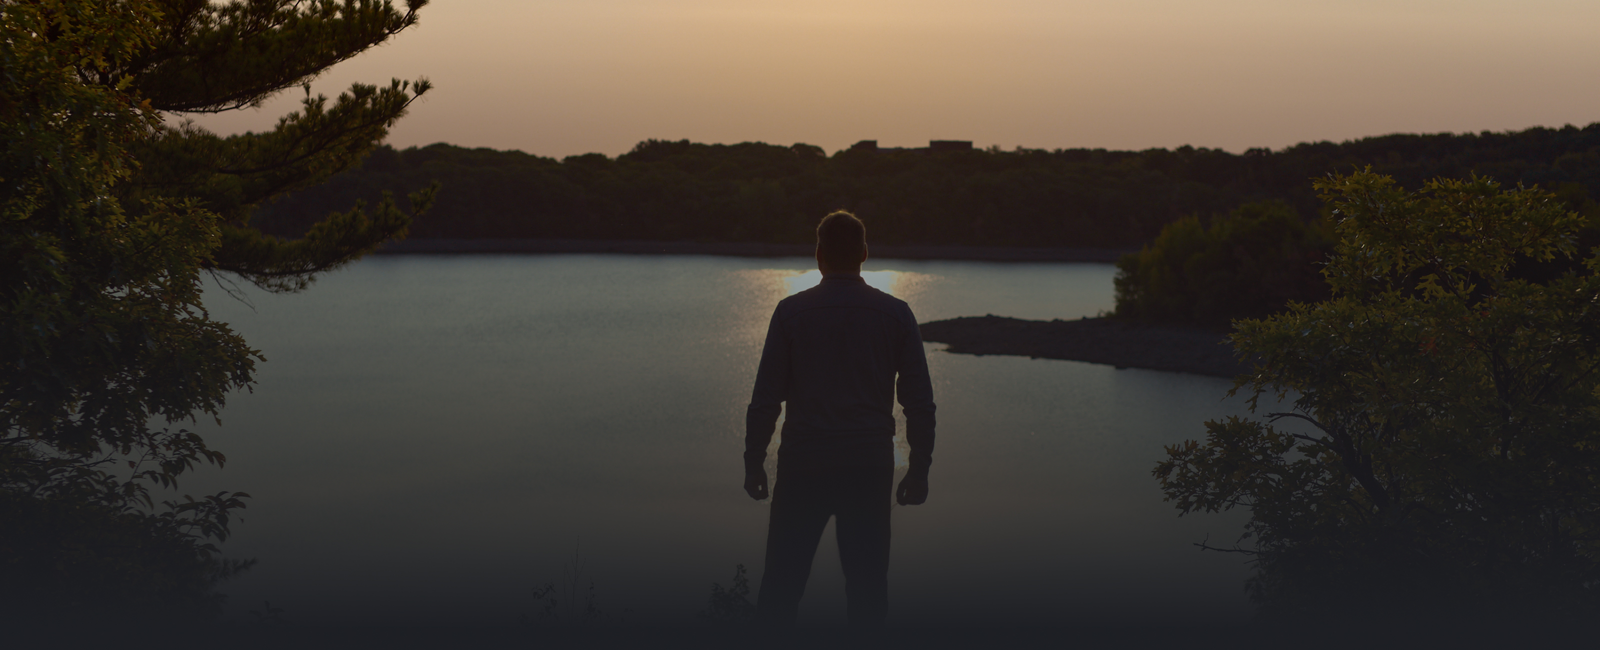 image of man looking out over a body of water